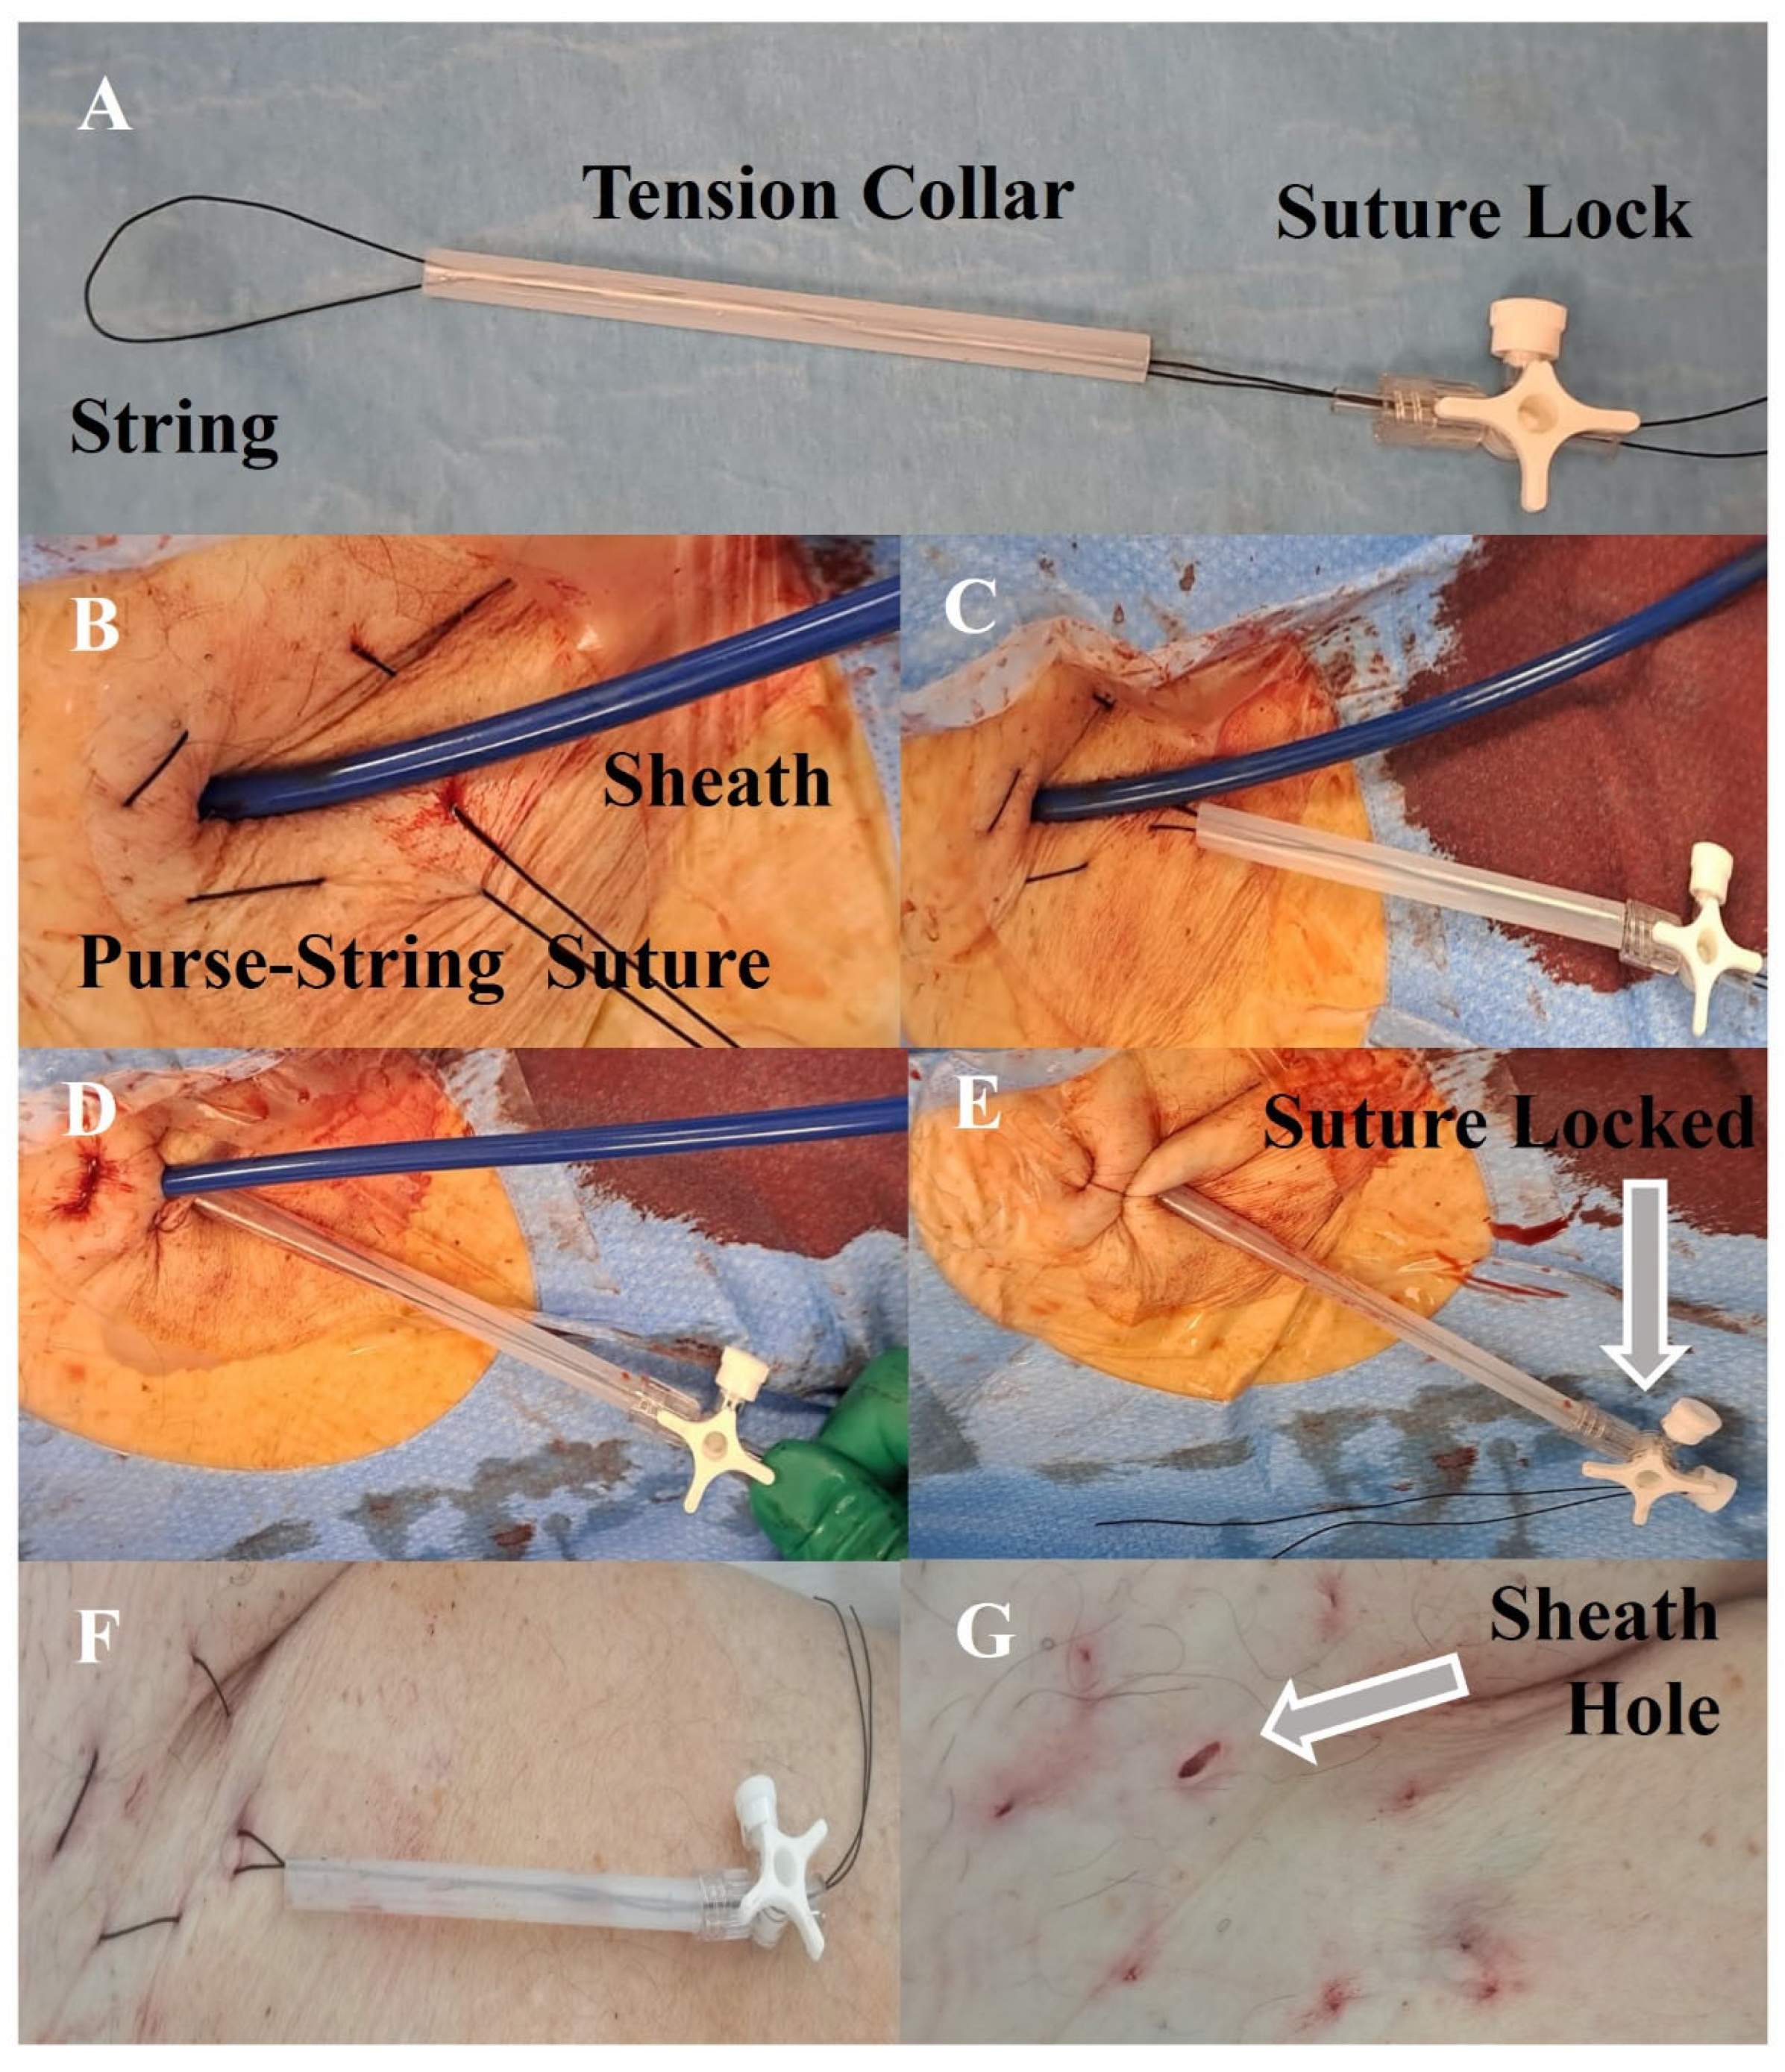 Common Suture Patterns - GynecolOncol